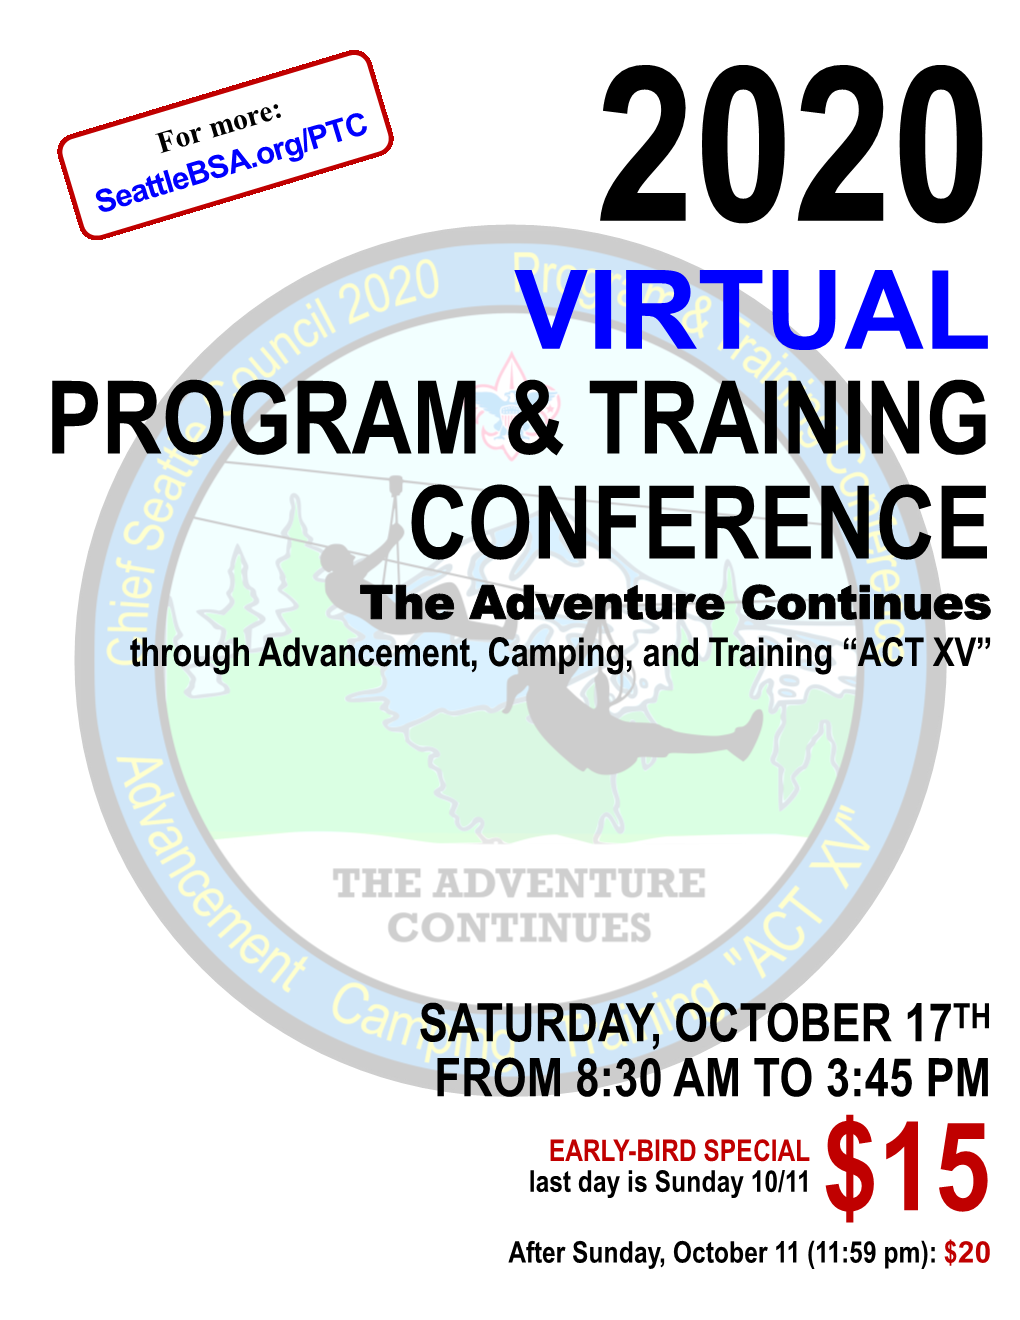 VIRTUAL PROGRAM & TRAINING CONFERENCE the Adventure Continues Through Advancement, Camping, and Training “ACT XV”